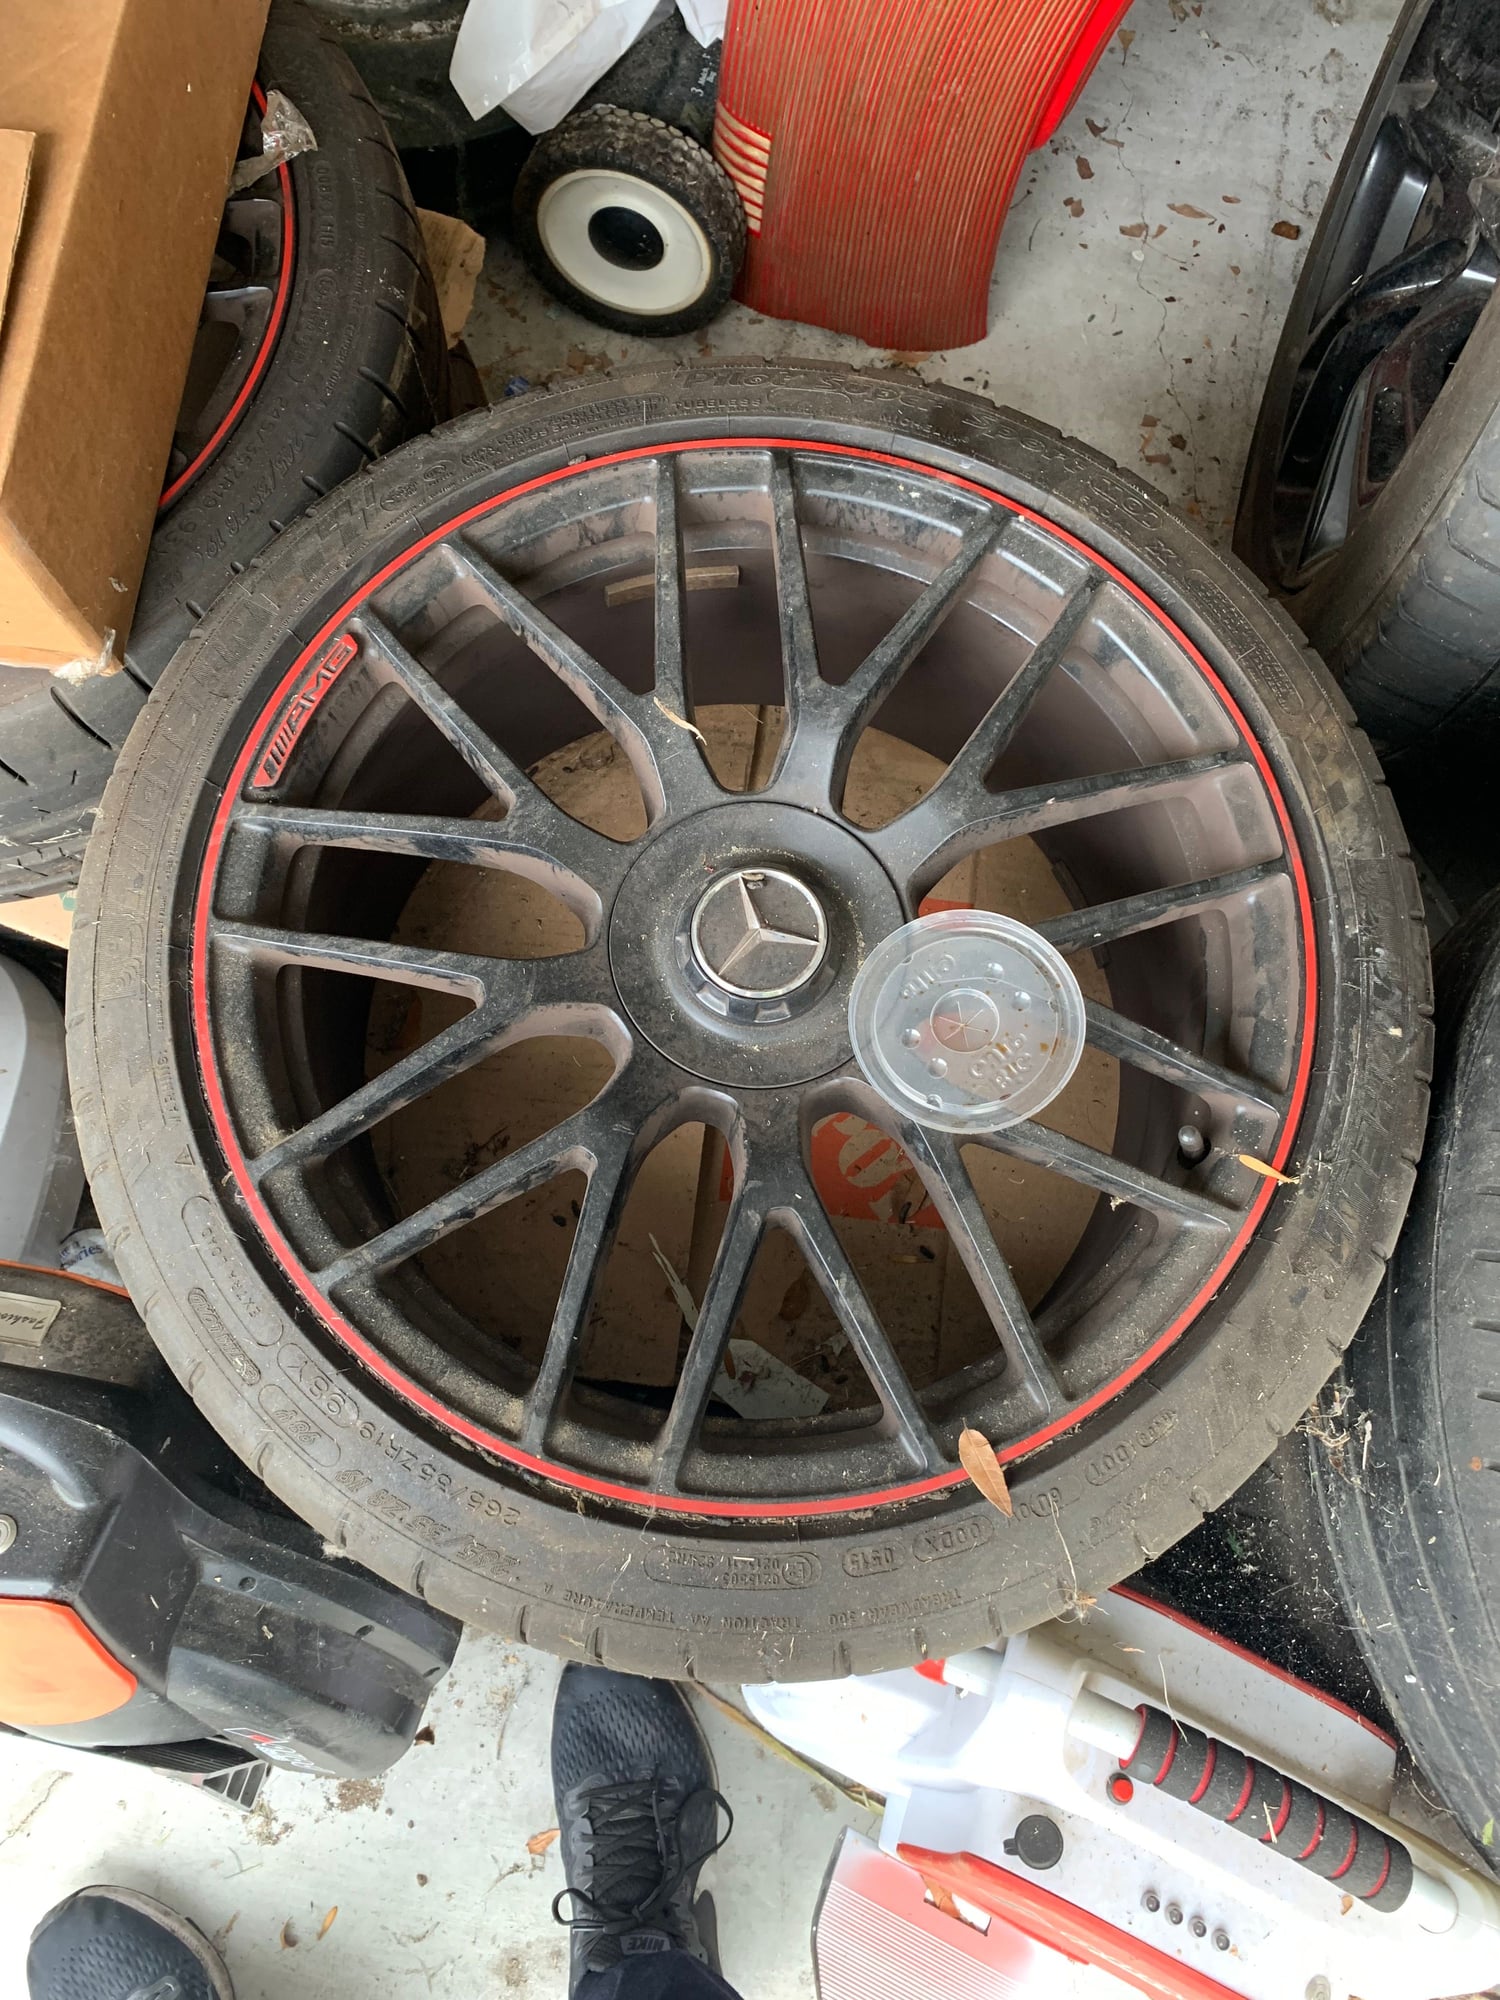 Wheels and Tires/Axles - C63s W205 Edition 1 Wheels for Sedan w/ Tires and TPMS - Used - San Diego, CA 92104, United States